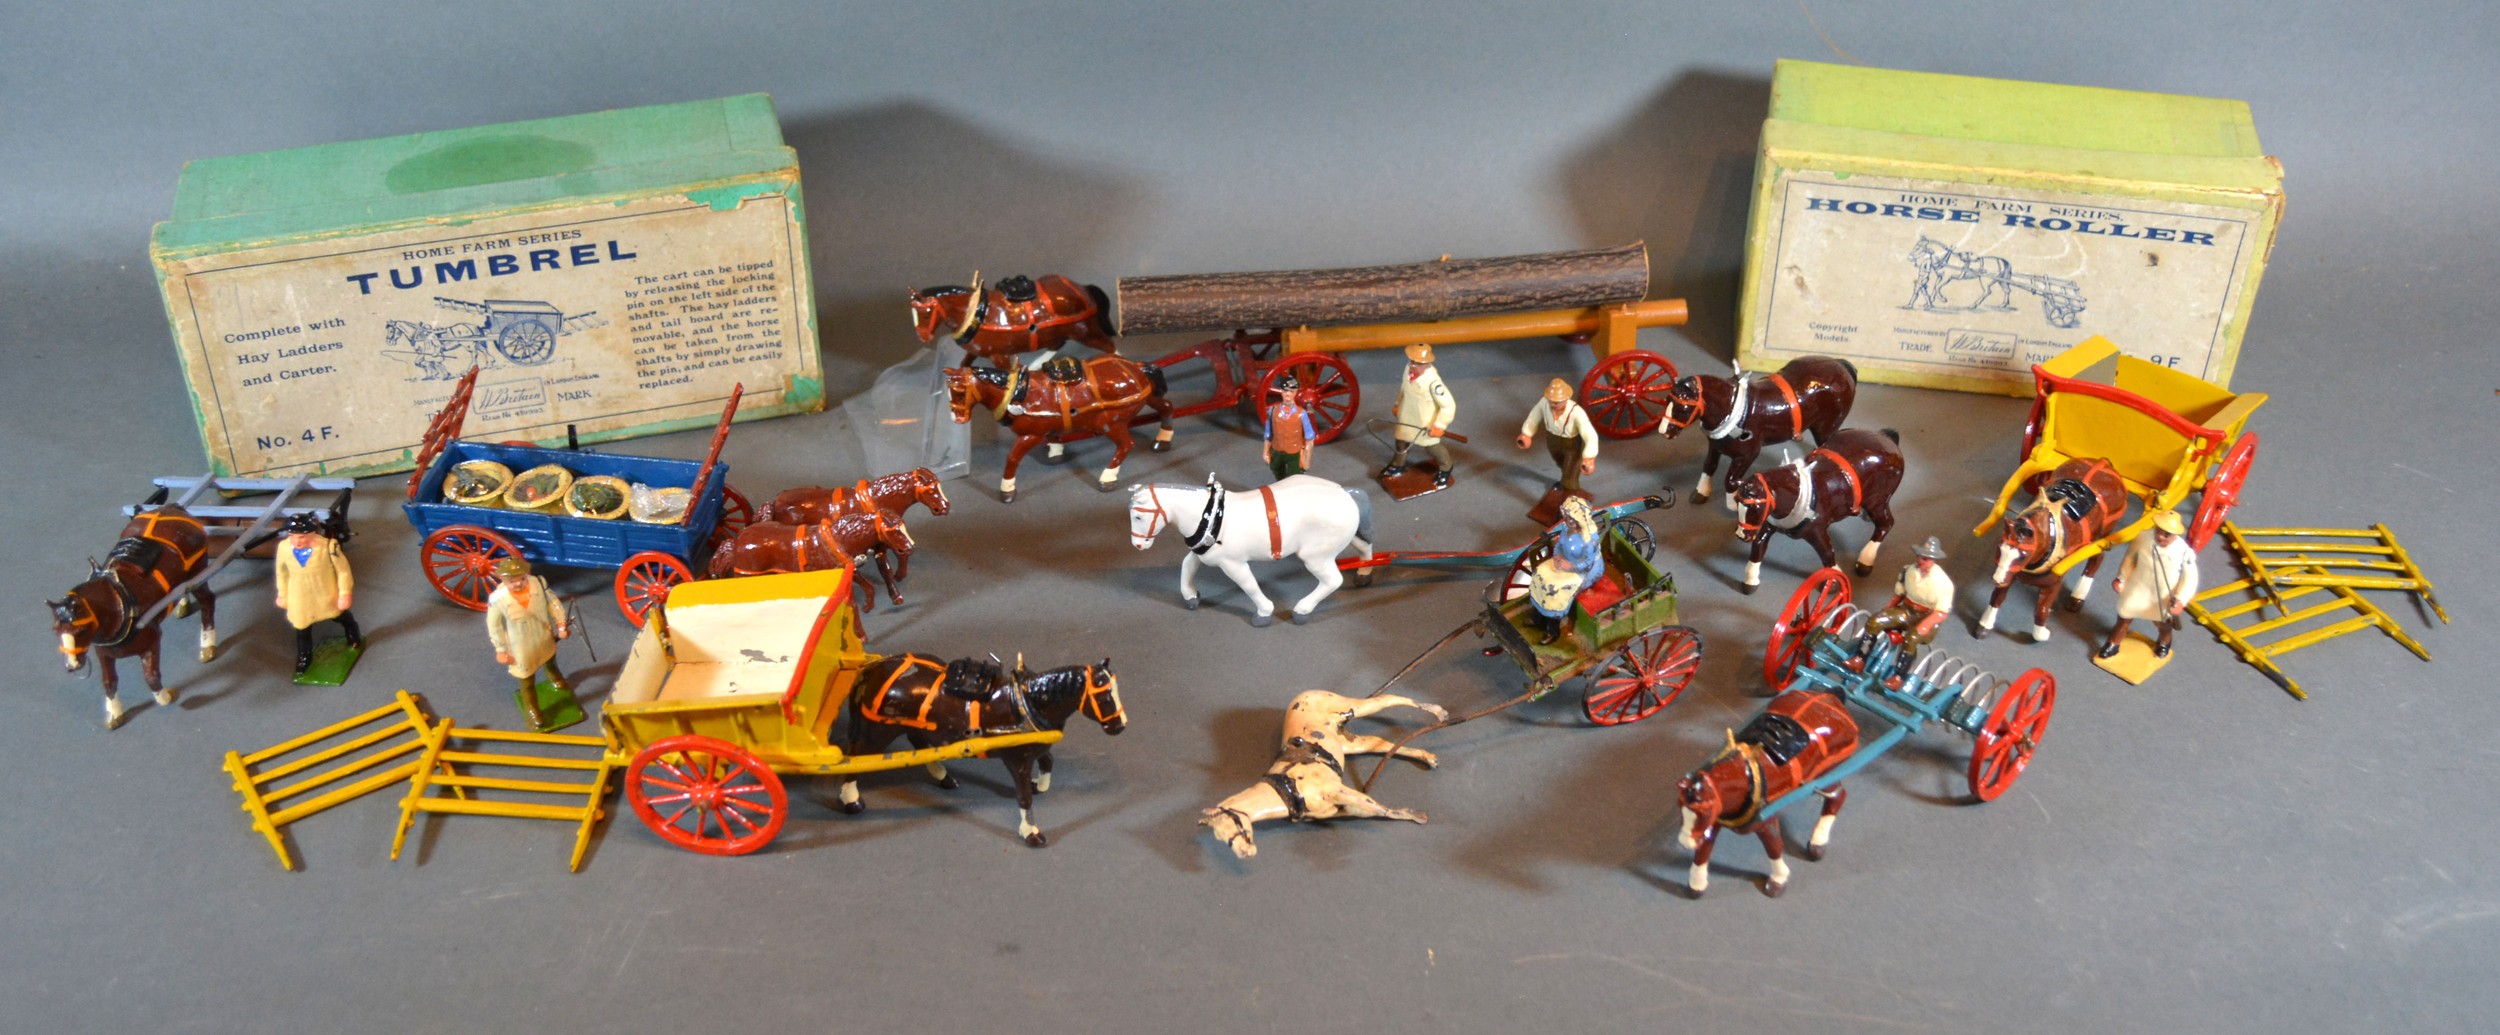 A Britain's Home Farm Series Tumbrel No. 4F with original box together with a collection of other